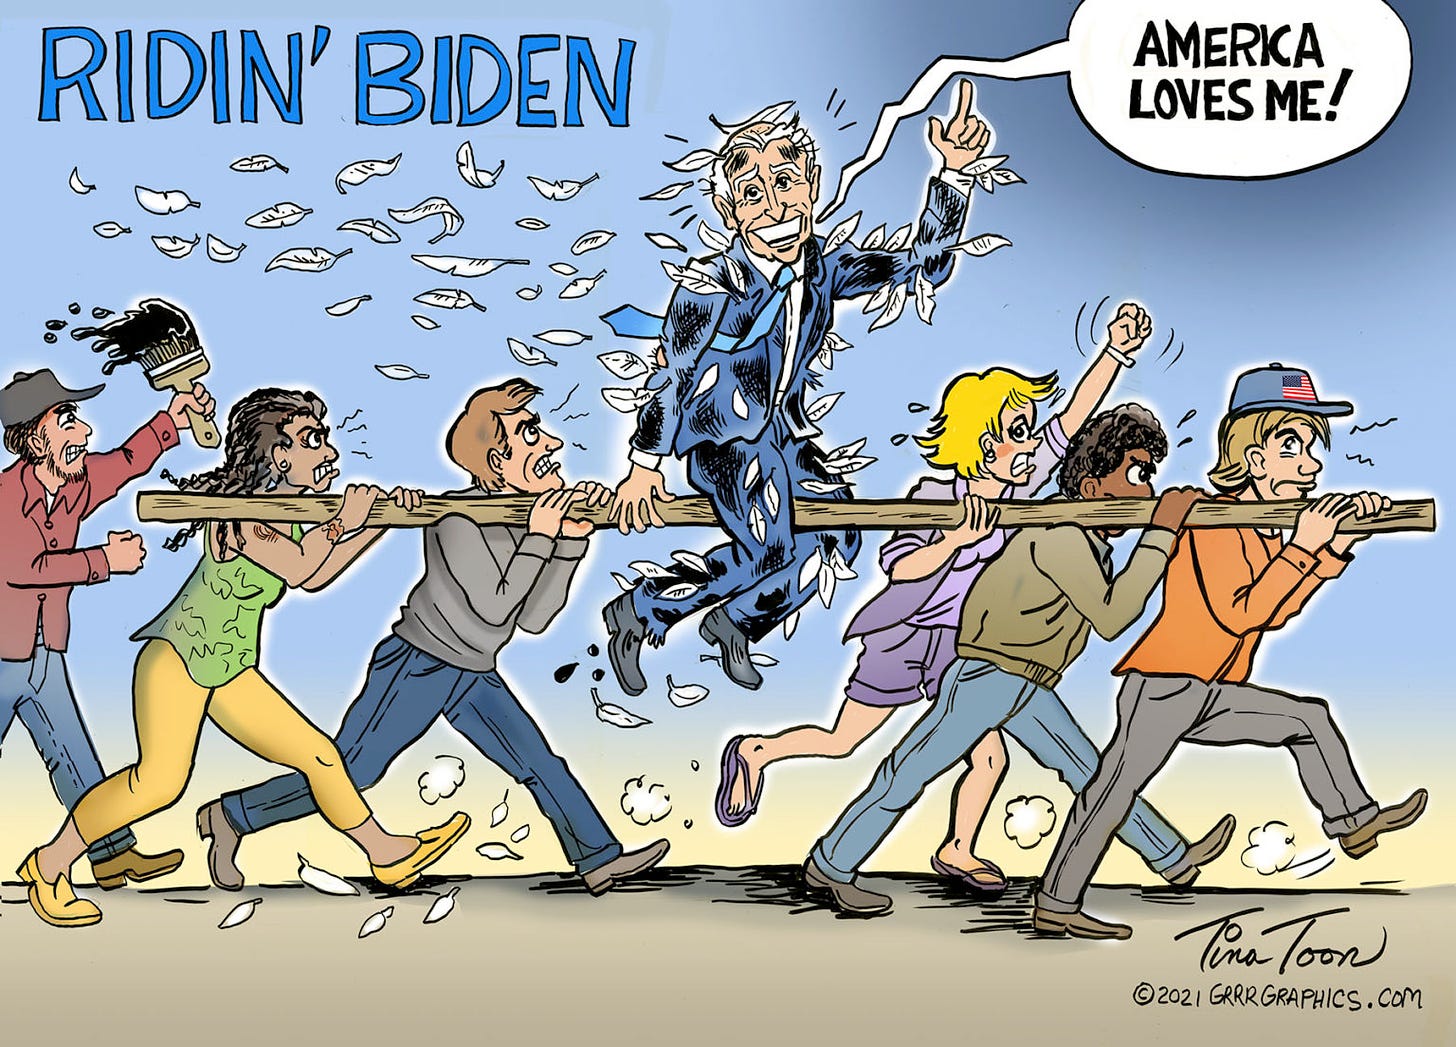 Riding Biden out of town